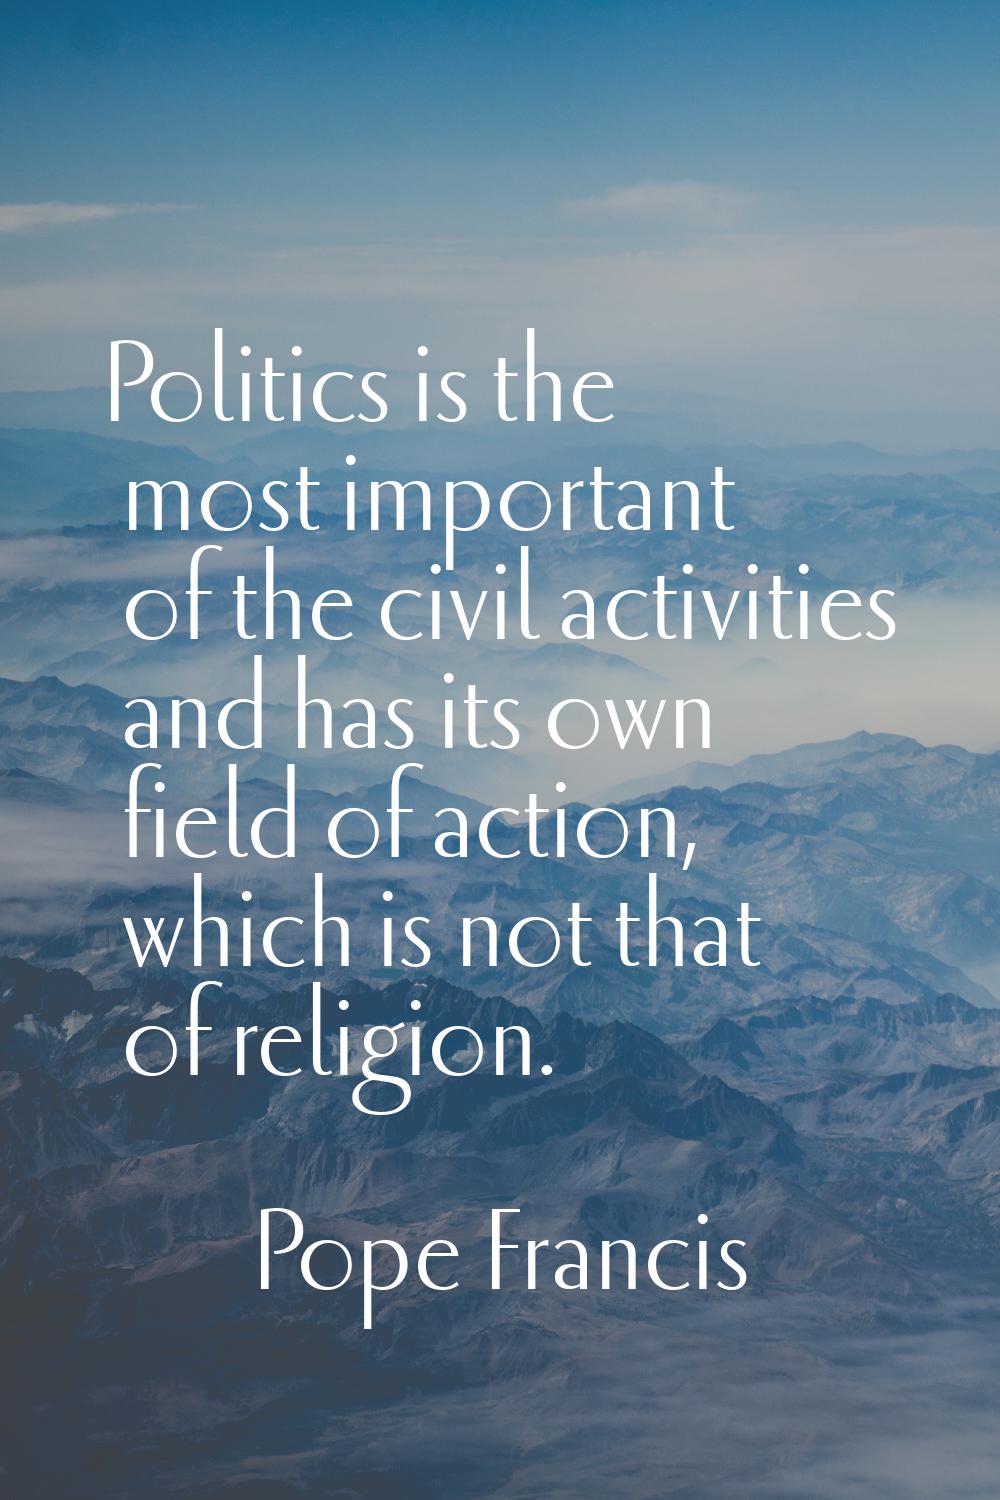 Politics is the most important of the civil activities and has its own field of action, which is no